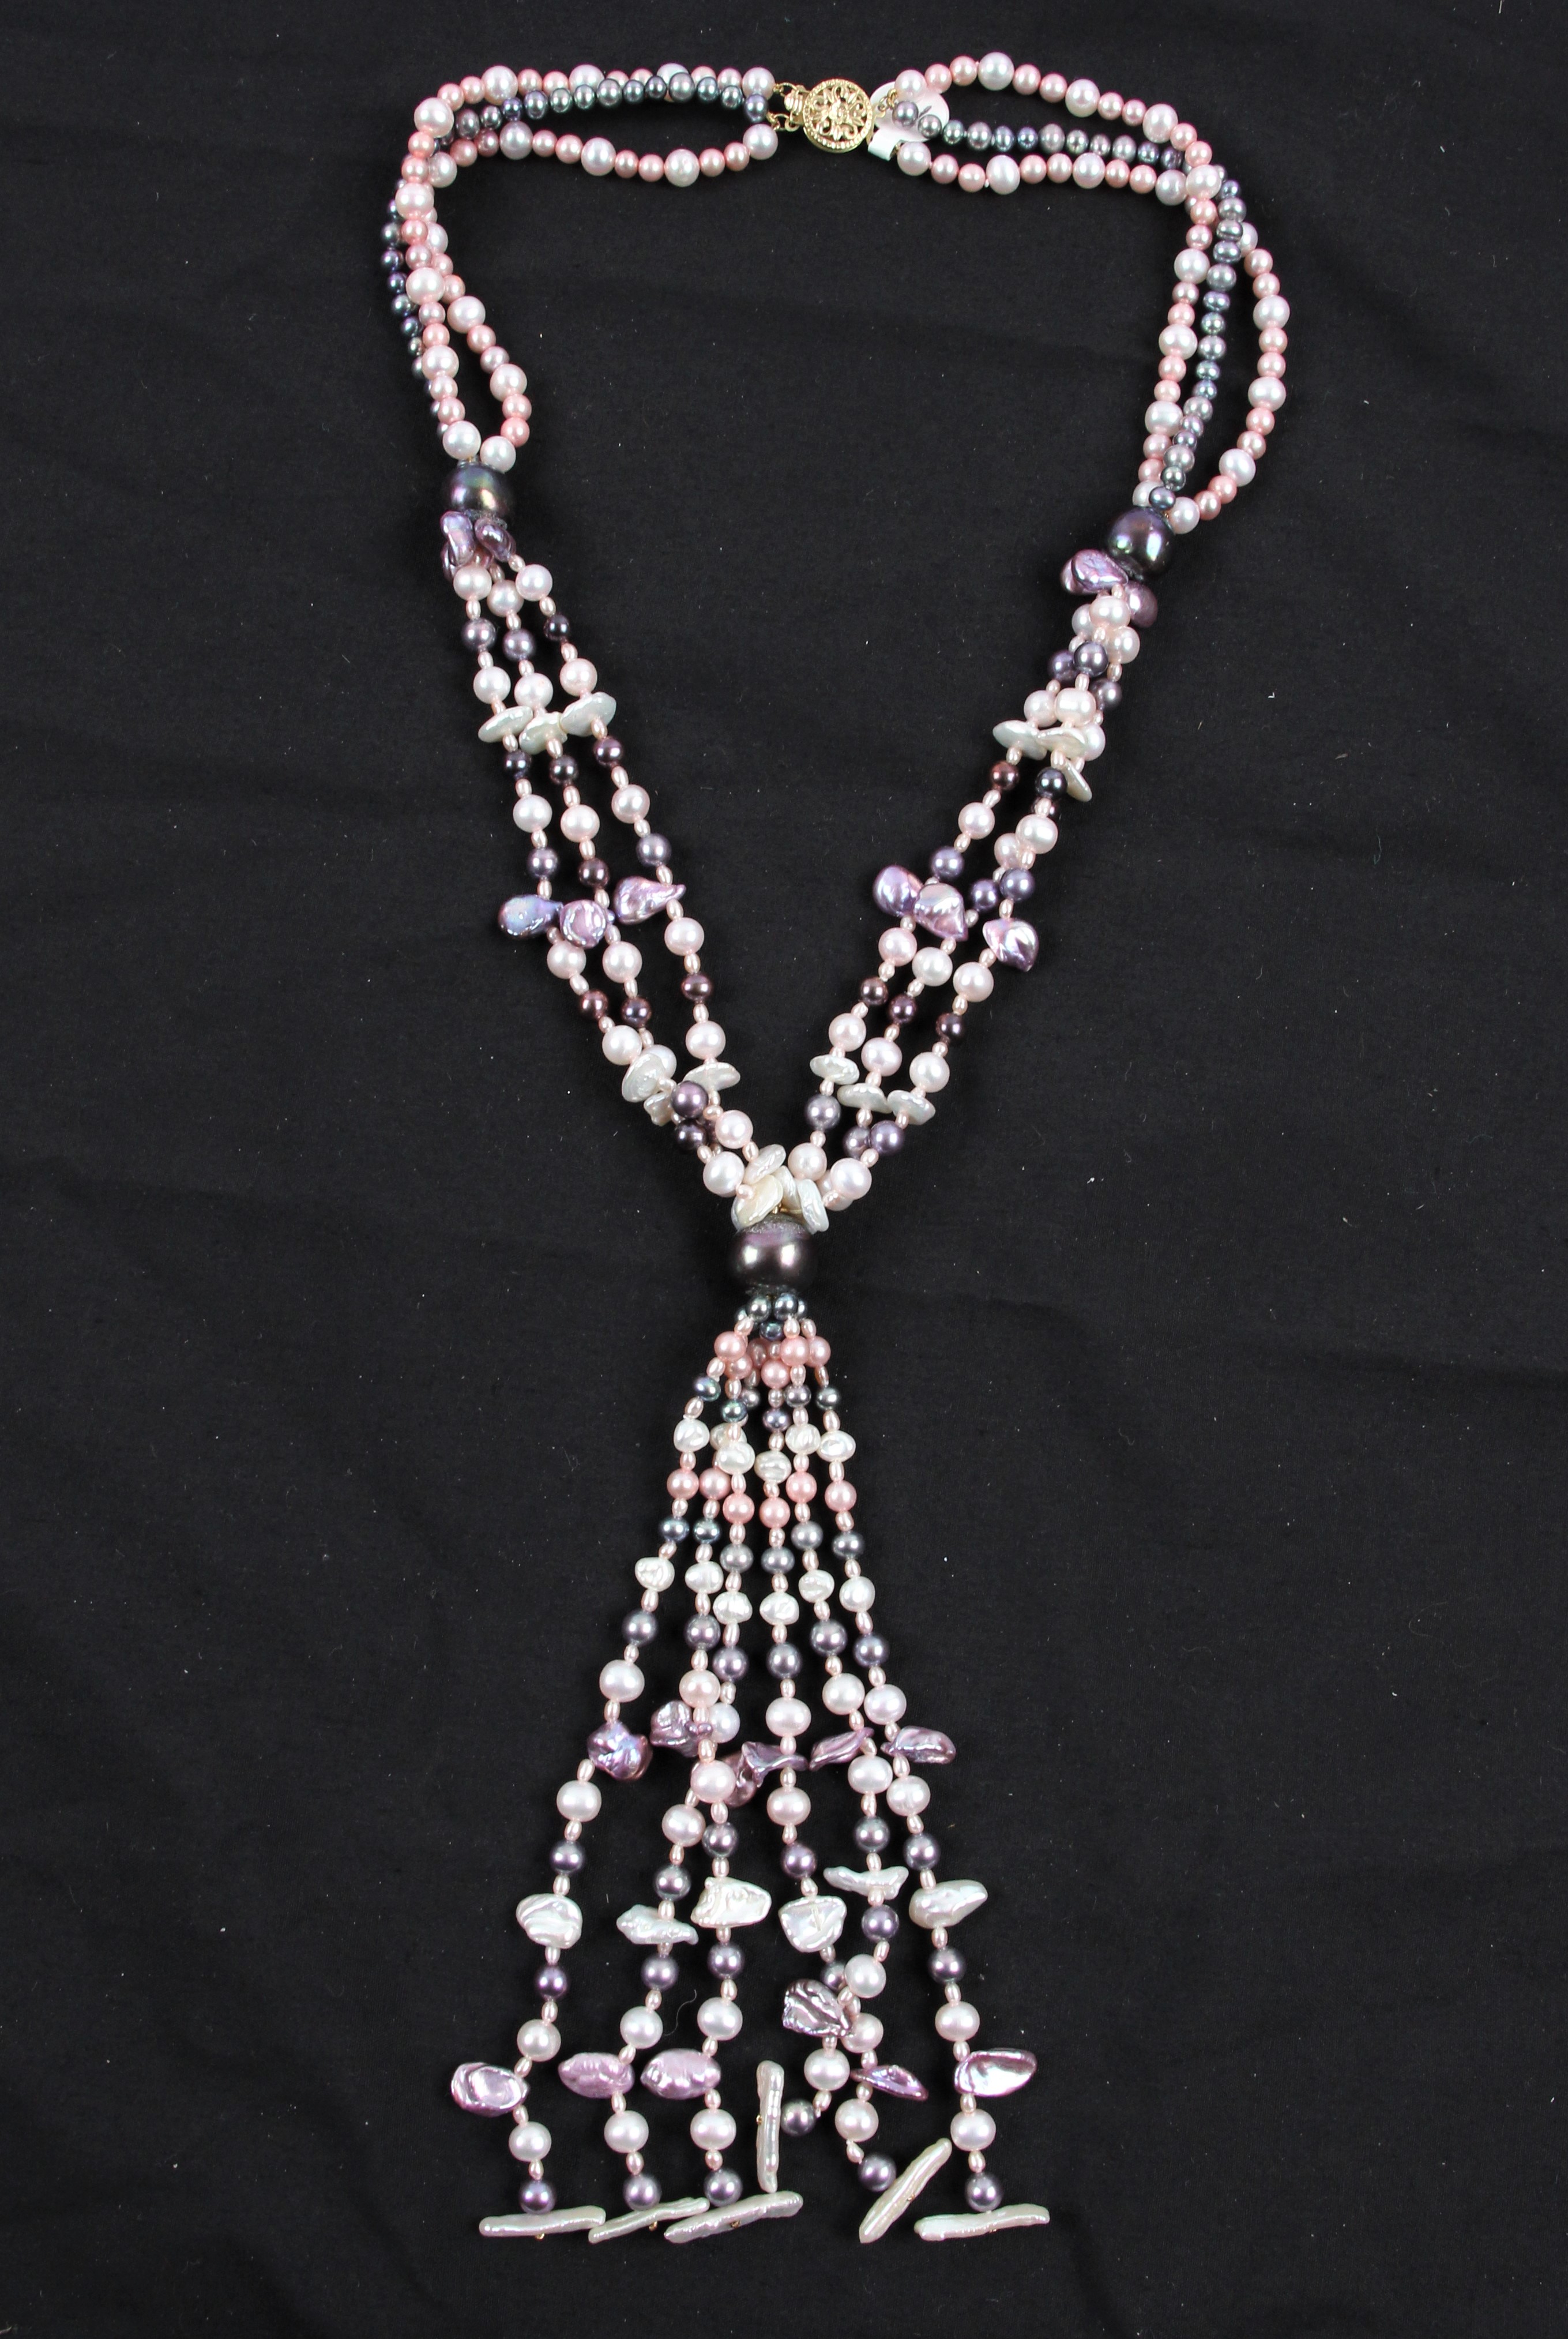 A triple strand string of cultured pearls in gathered design, comprising pink, purple white and